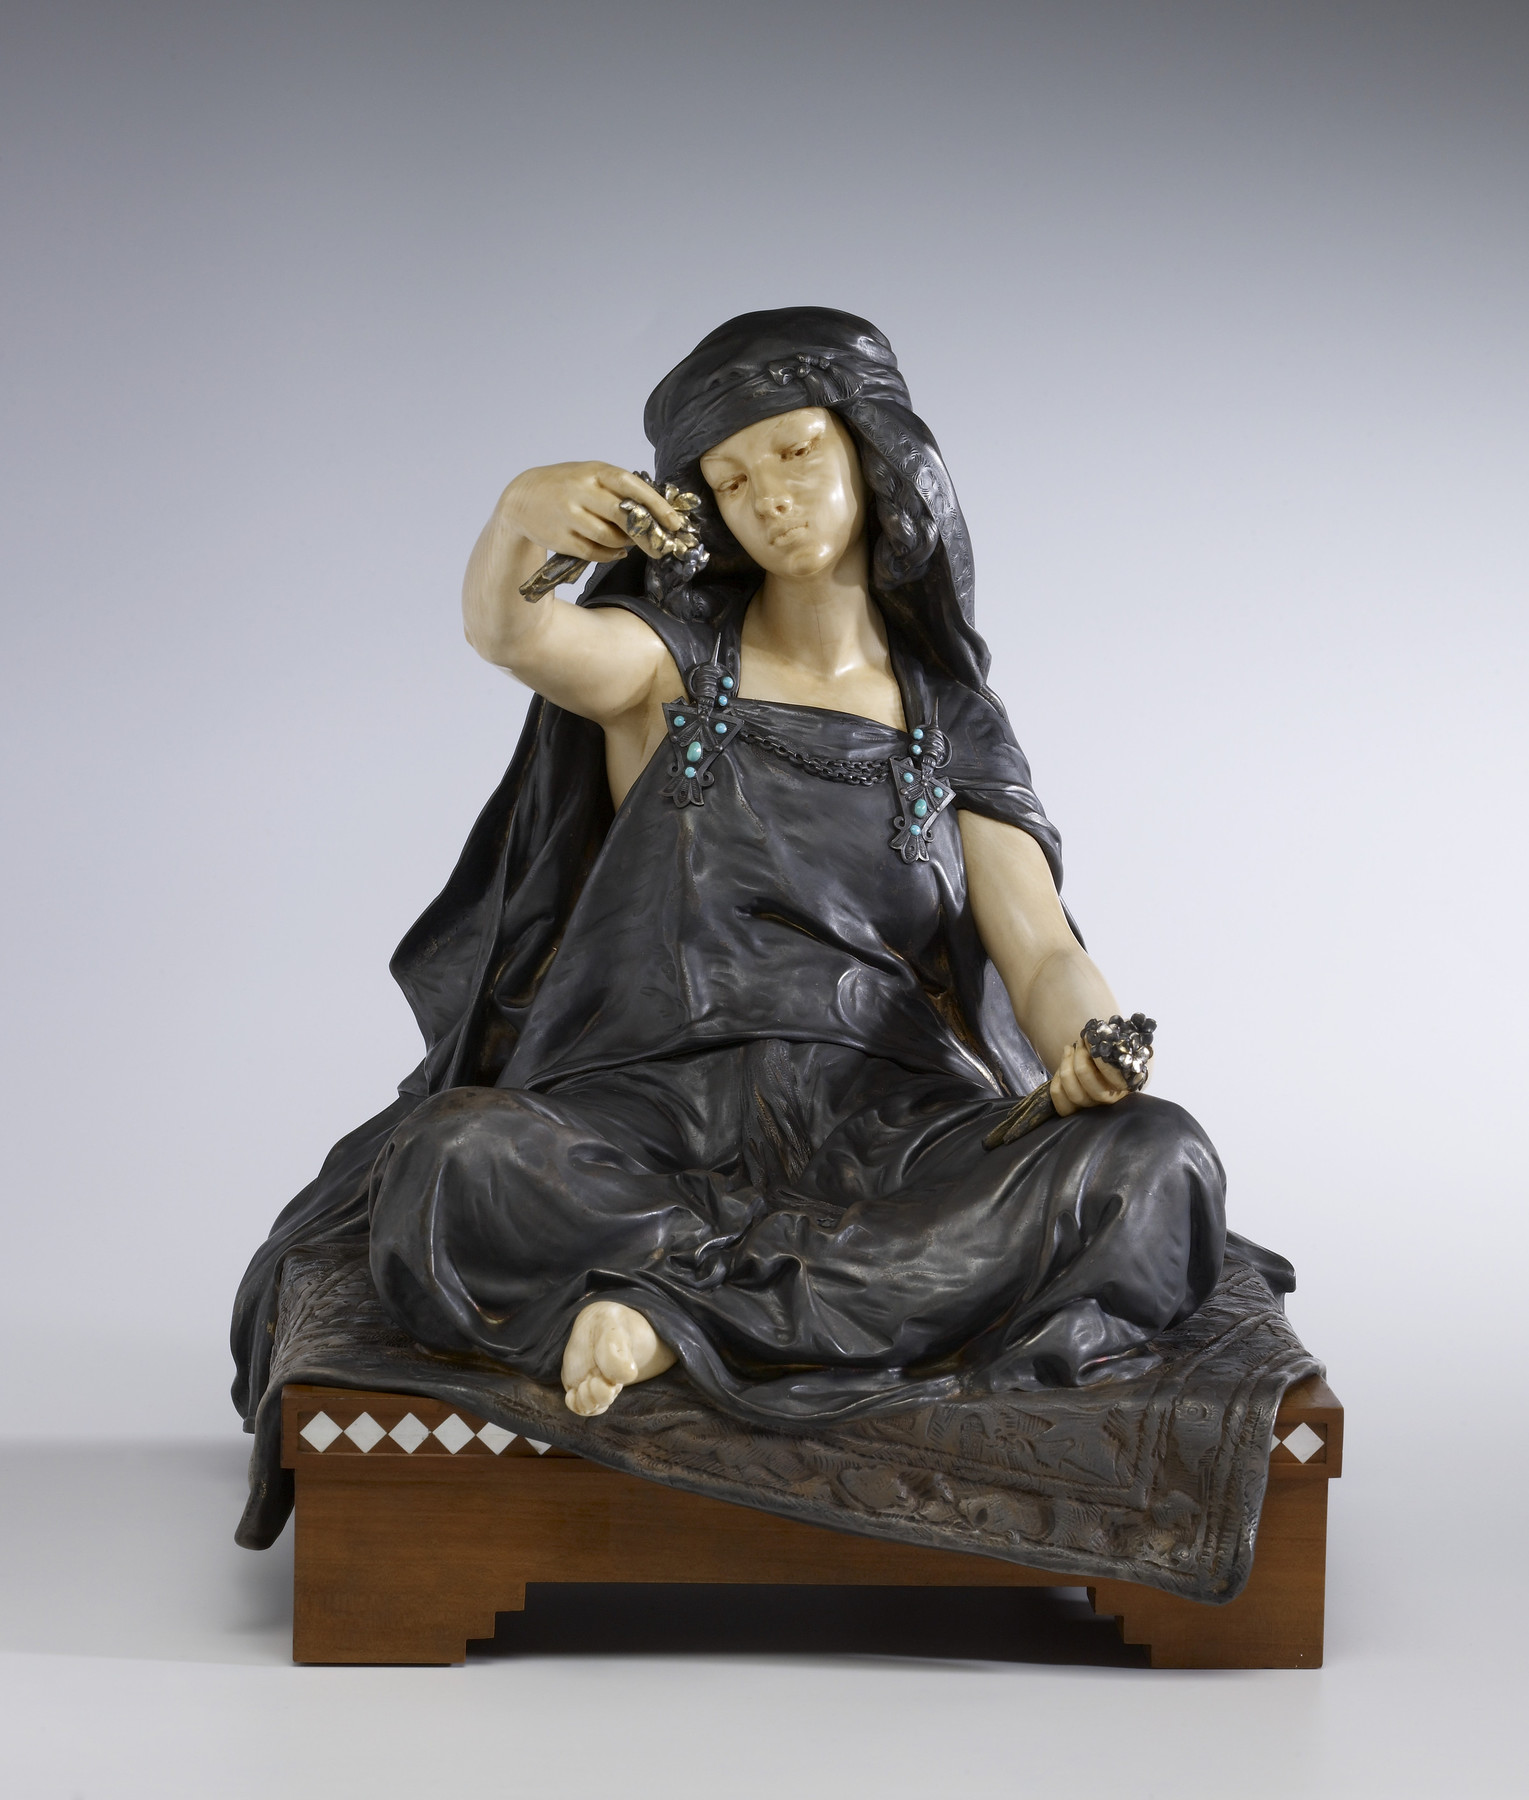 Figure 11. Louis­Ernest Barrias, The Young Girl of Bou Saâda, after 1890, ivory, silveredbronze, wood, mother­of­pearl and turquoise, 12 3/8 × 11 1/4 × 10 1/2 in. Acquired by Henry Walters, 1900, The Walters Art Museum, Baltimore.